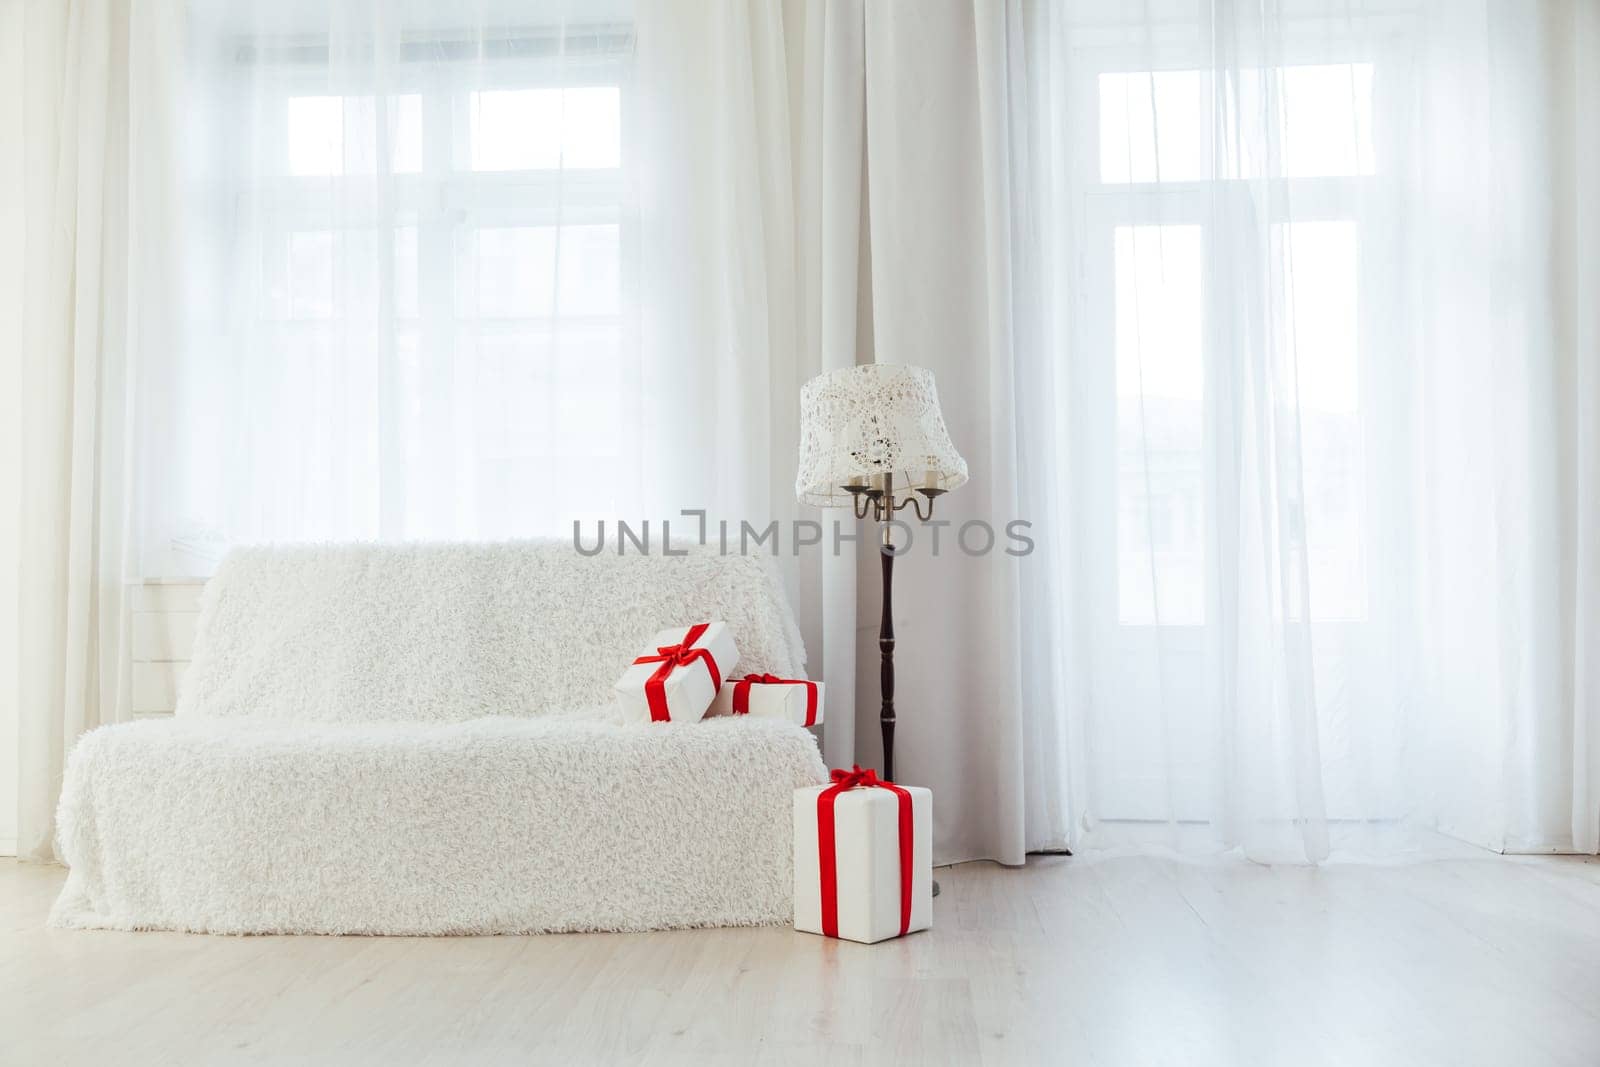 white sofa with gifts in the interior of the room with windows